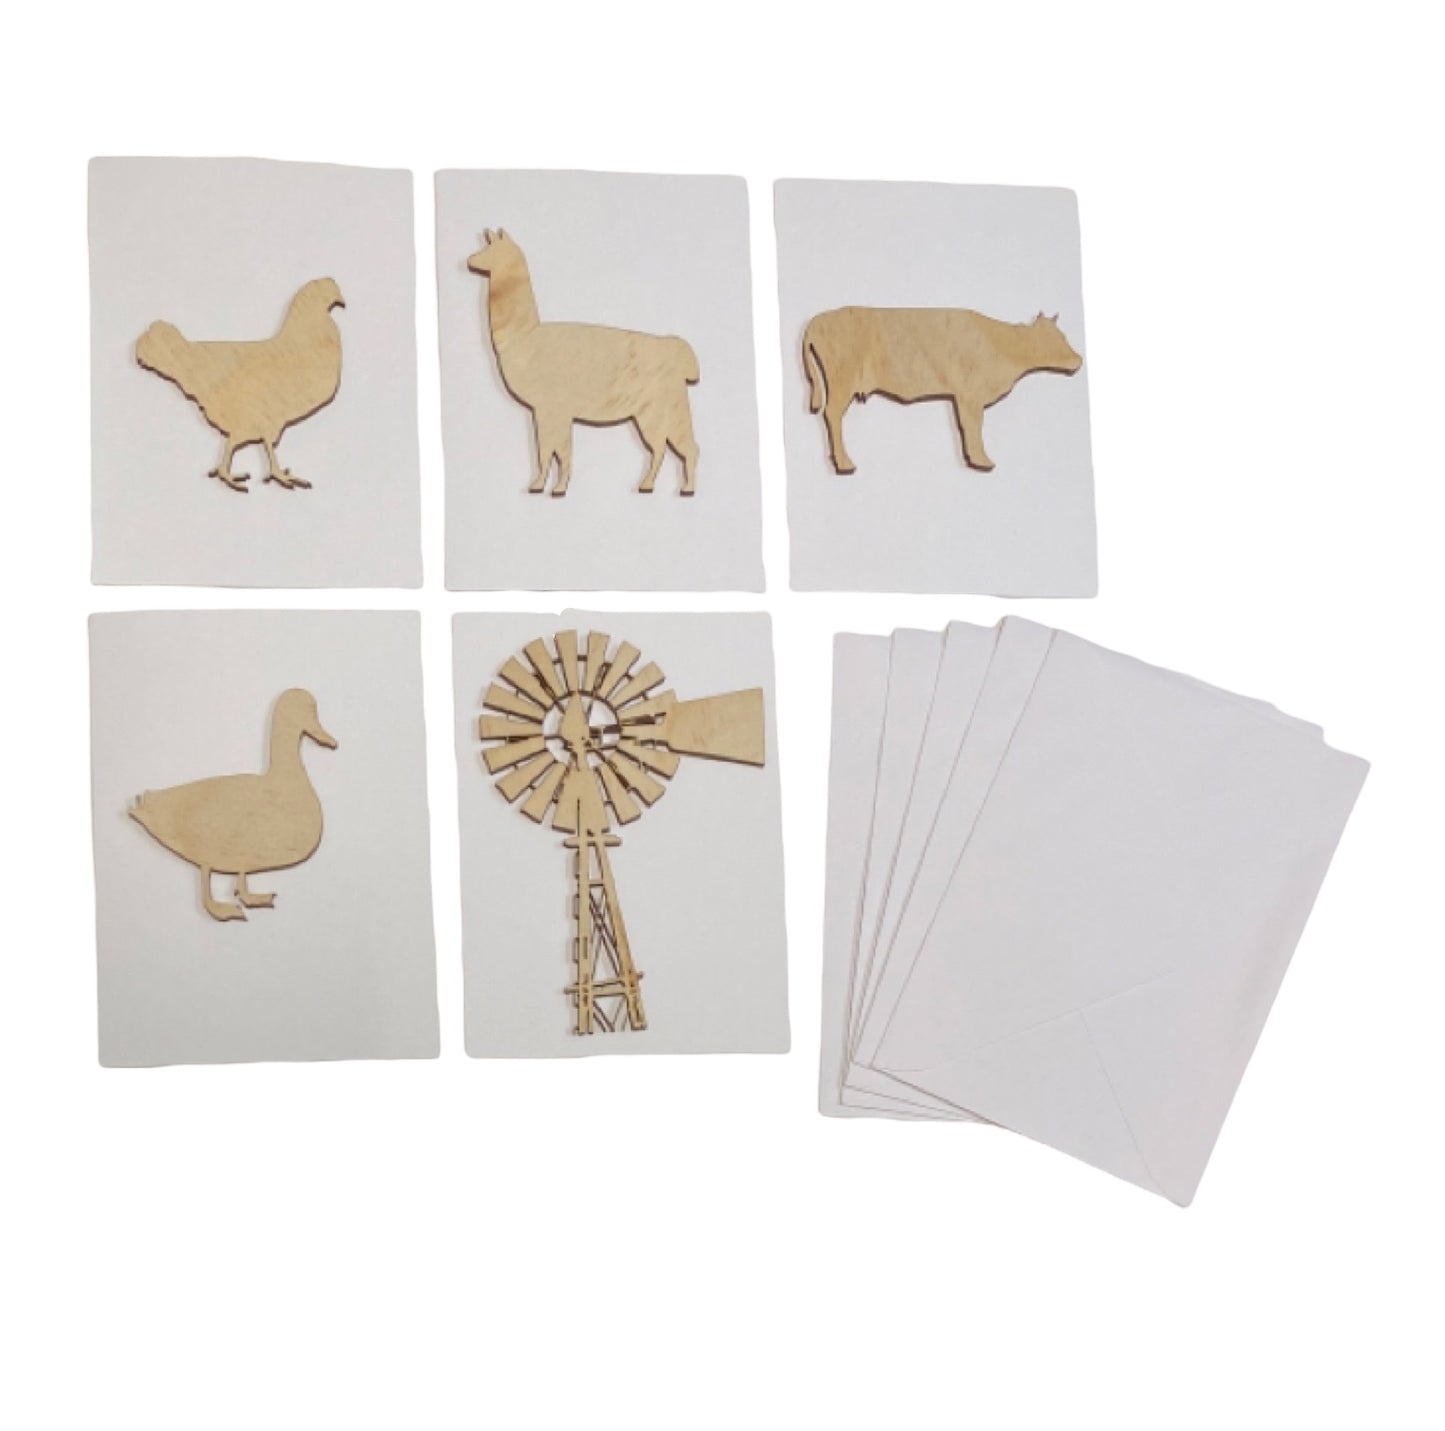 Card Envelope Greeting Set of 5 Country Farm White - The Renmy Store Homewares & Gifts 